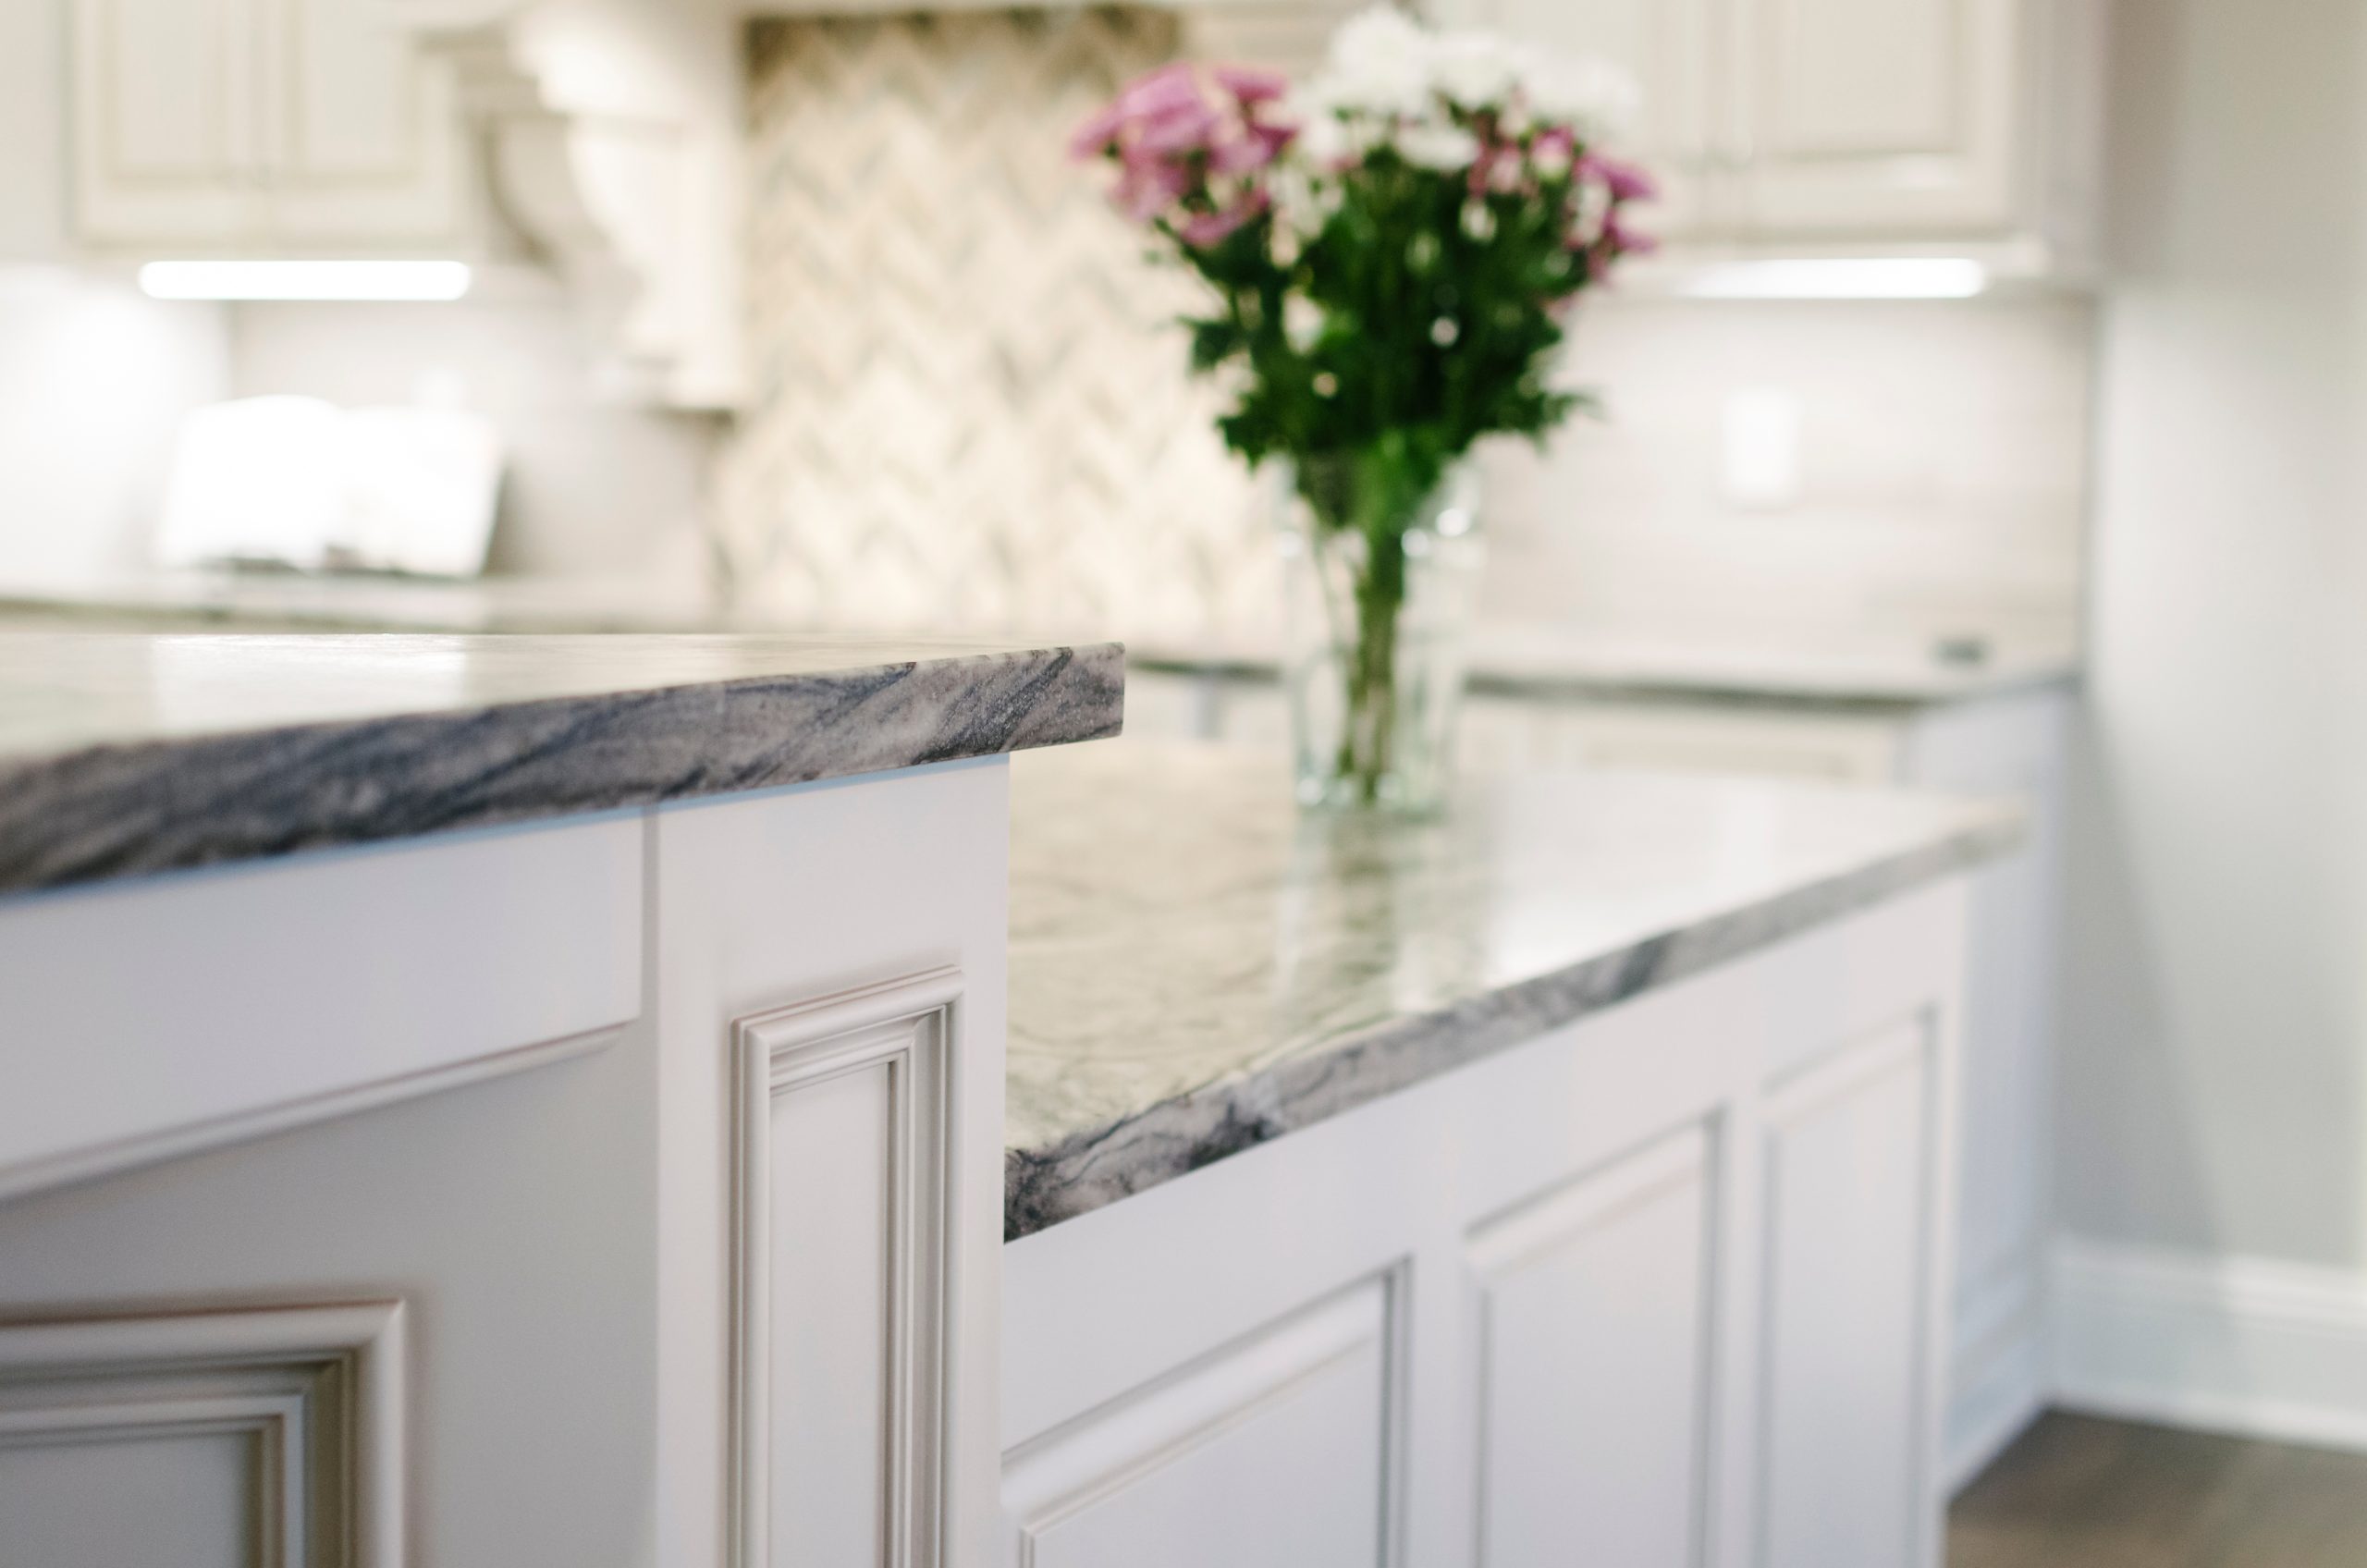 A kitchen with marble counter tops and a vase of flowers.